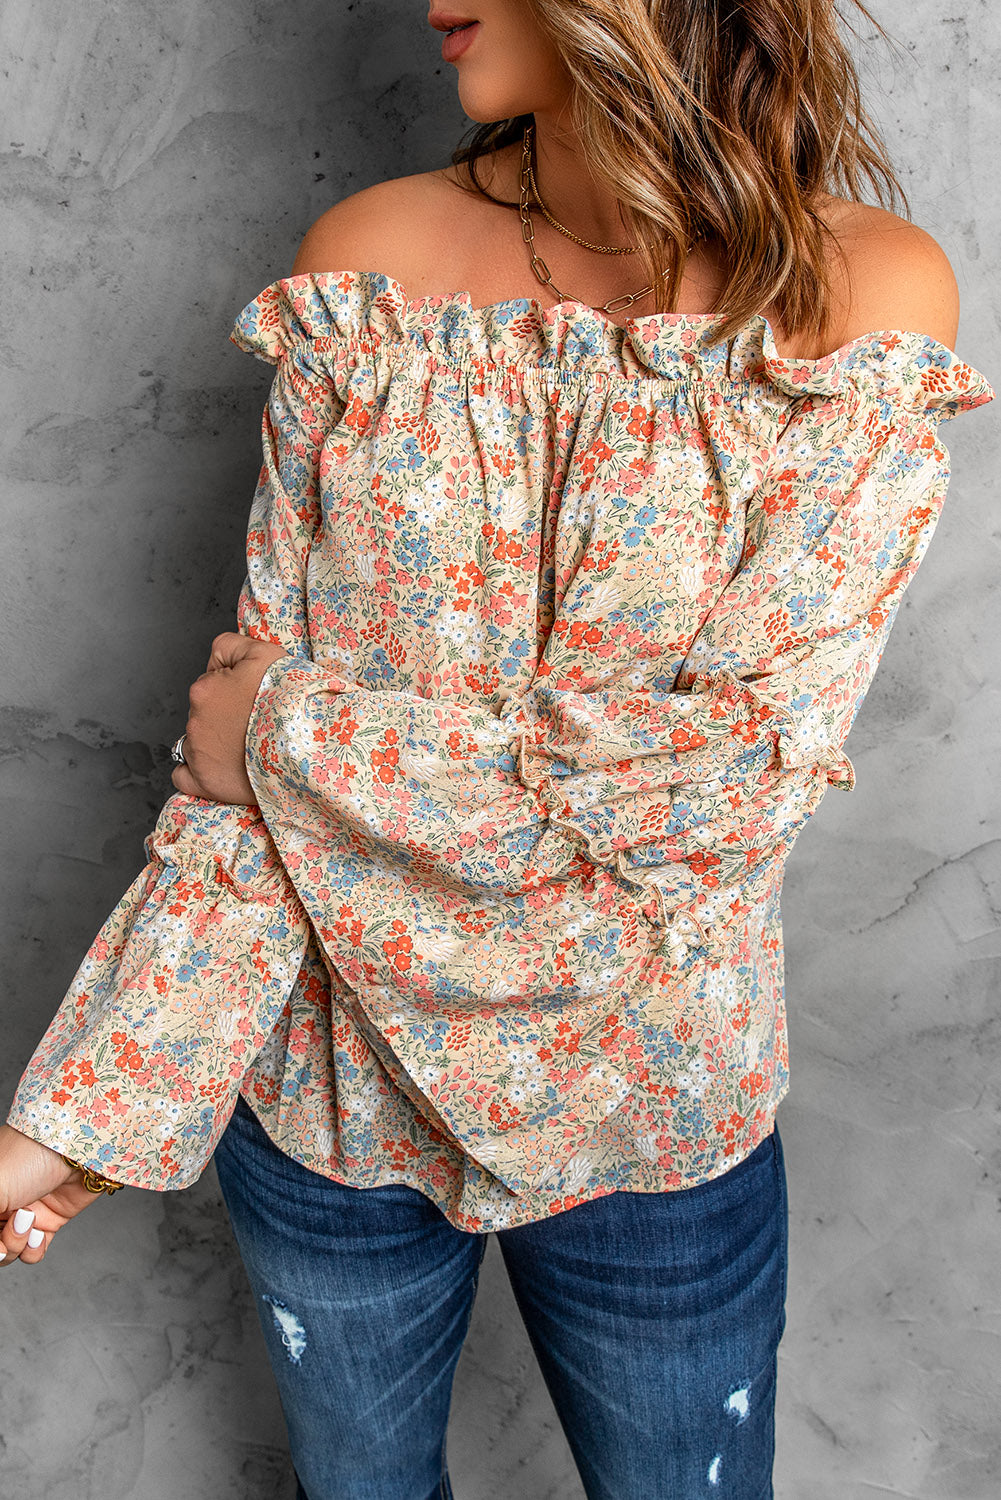 Chic Floral Print Off The Shoulder Ruffled Bell Sleeve Blouse